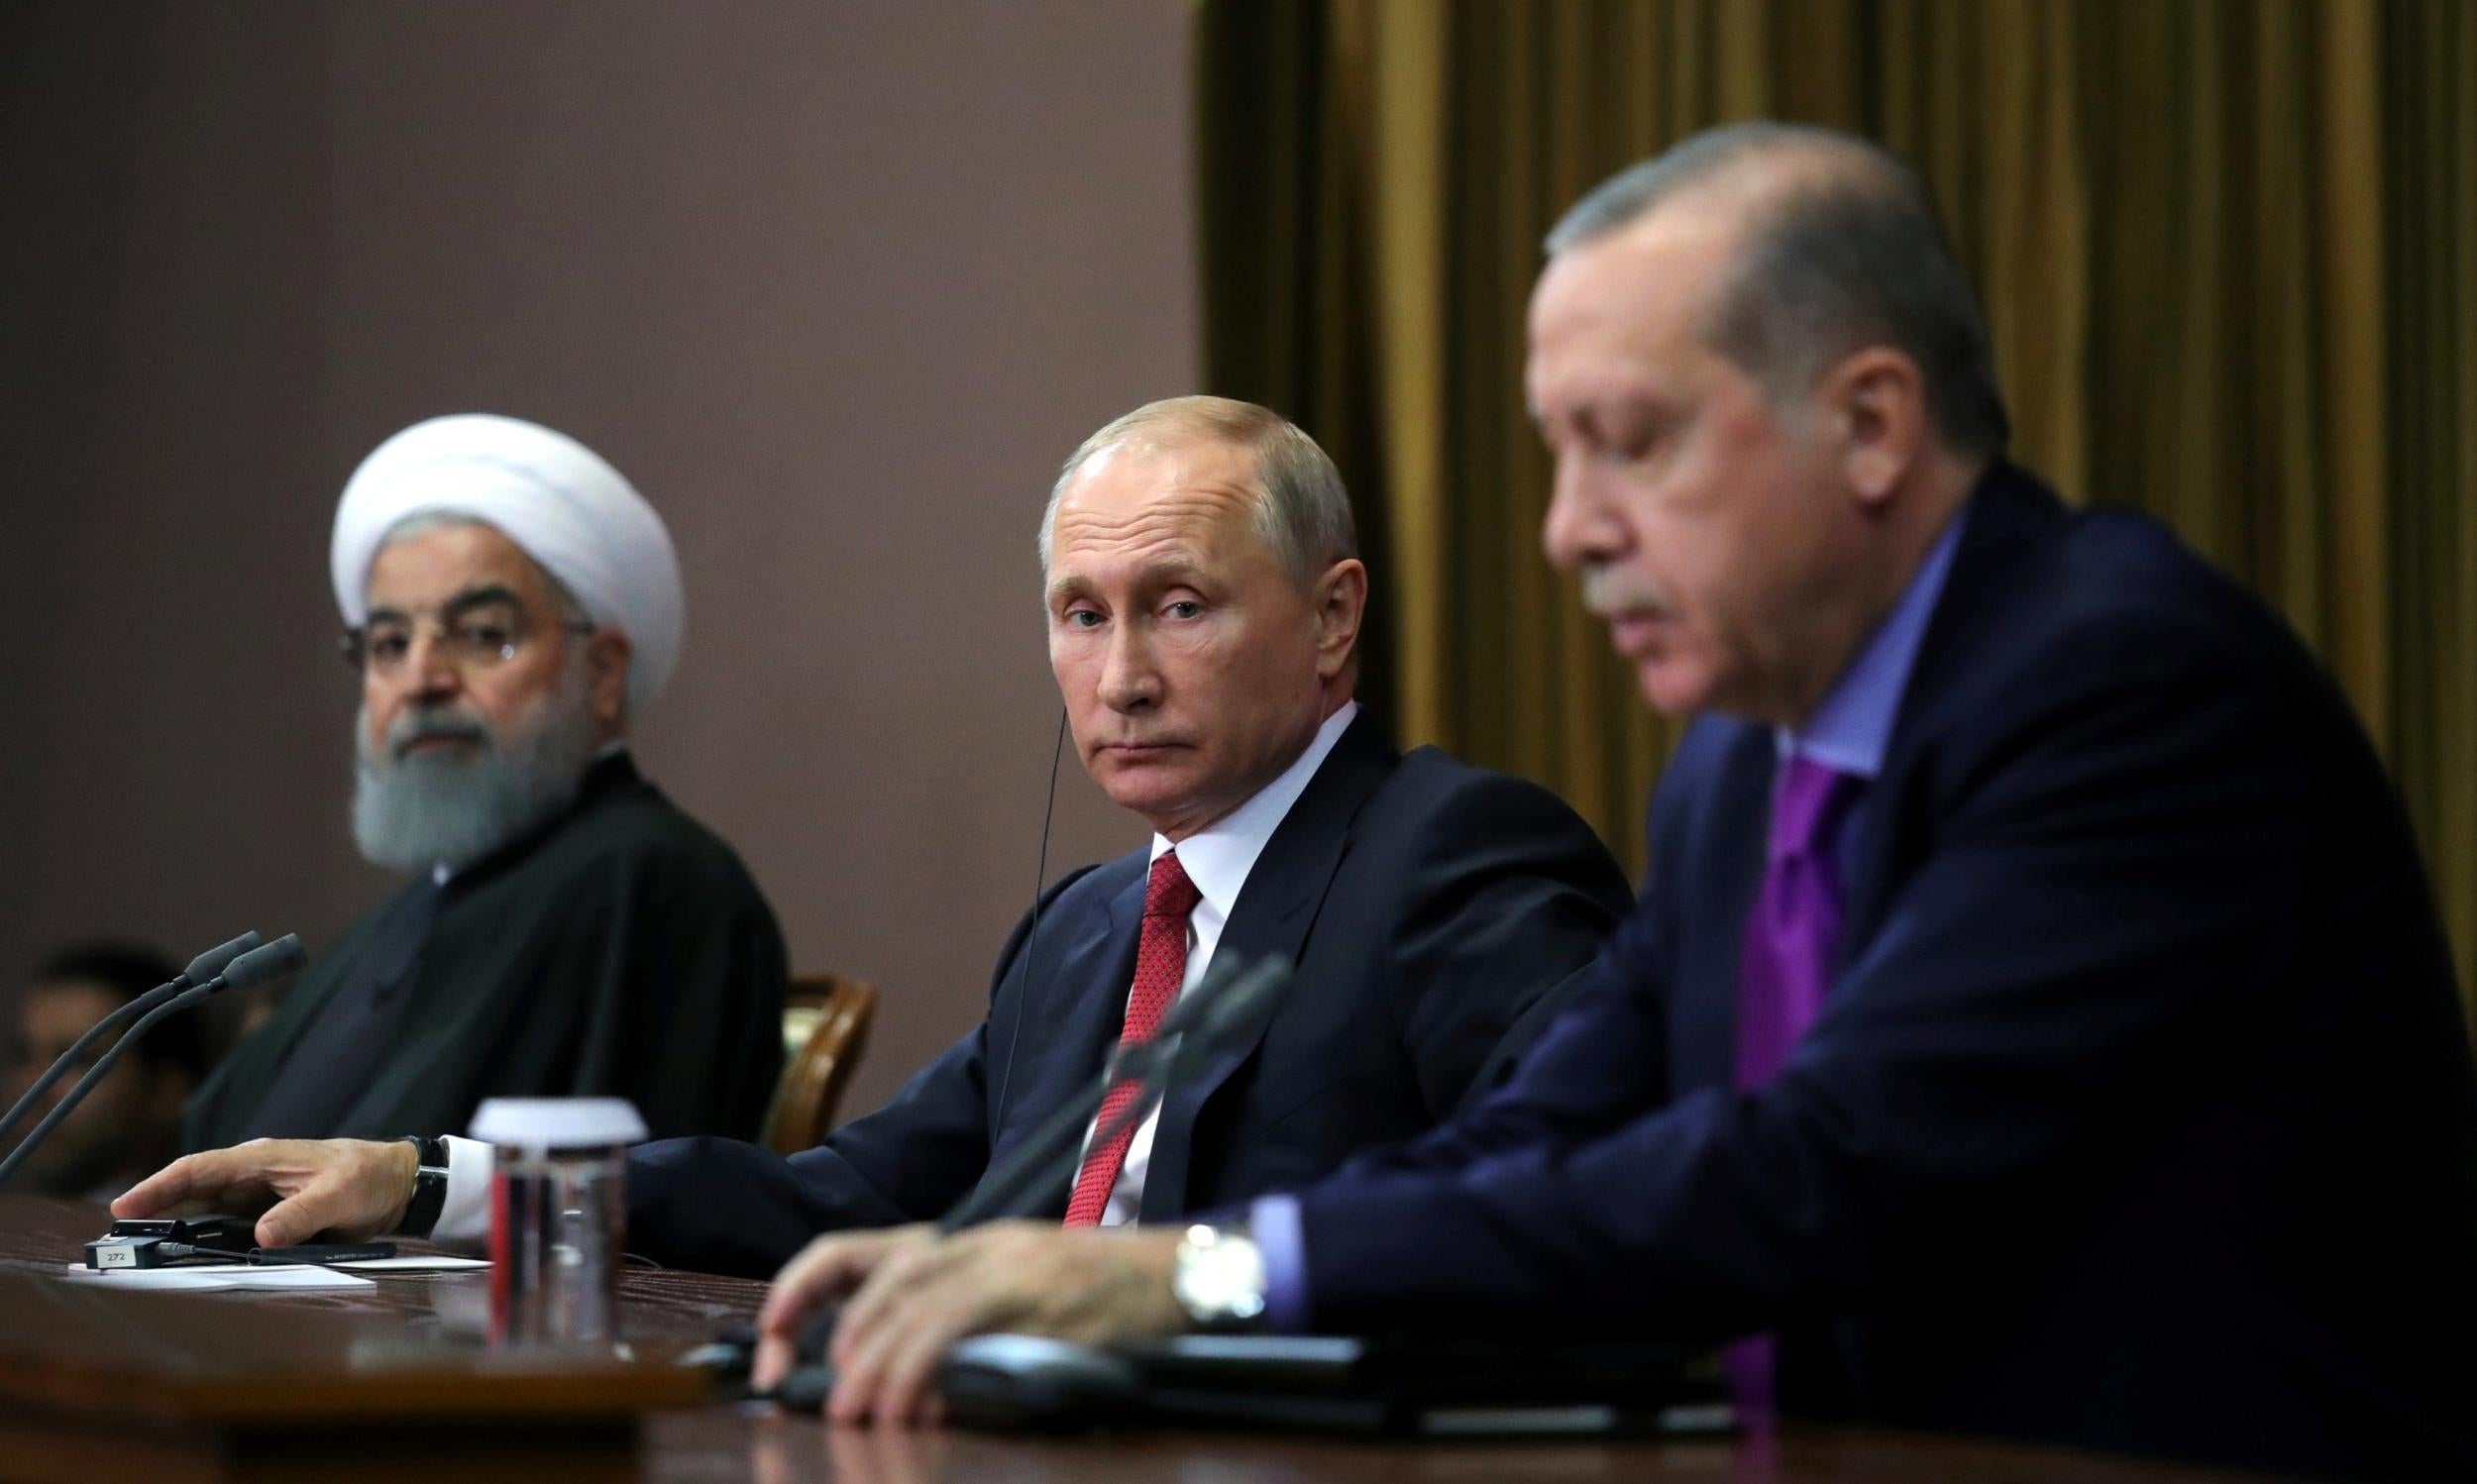 Russian President Vladimir Putin is flanked by Iranian President Hassan Rouhani (l) and Turkish Premier Recip Tayyip Erdogan at the Sochi summit this week